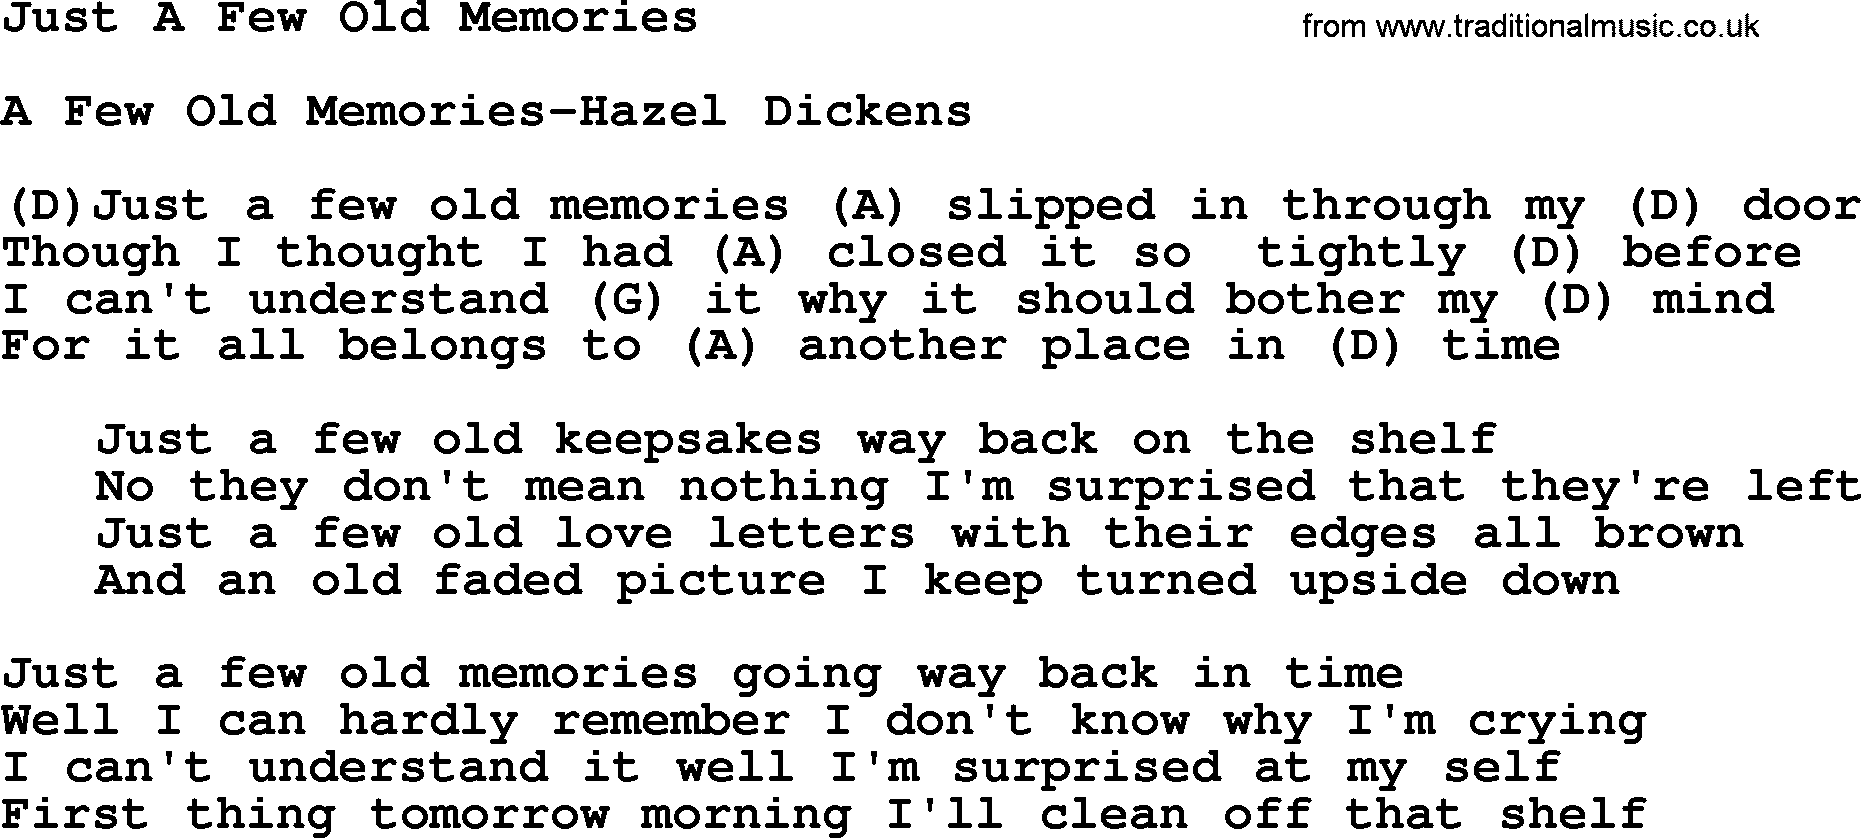 Bluegrass song: Just A Few Old Memories, lyrics and chords